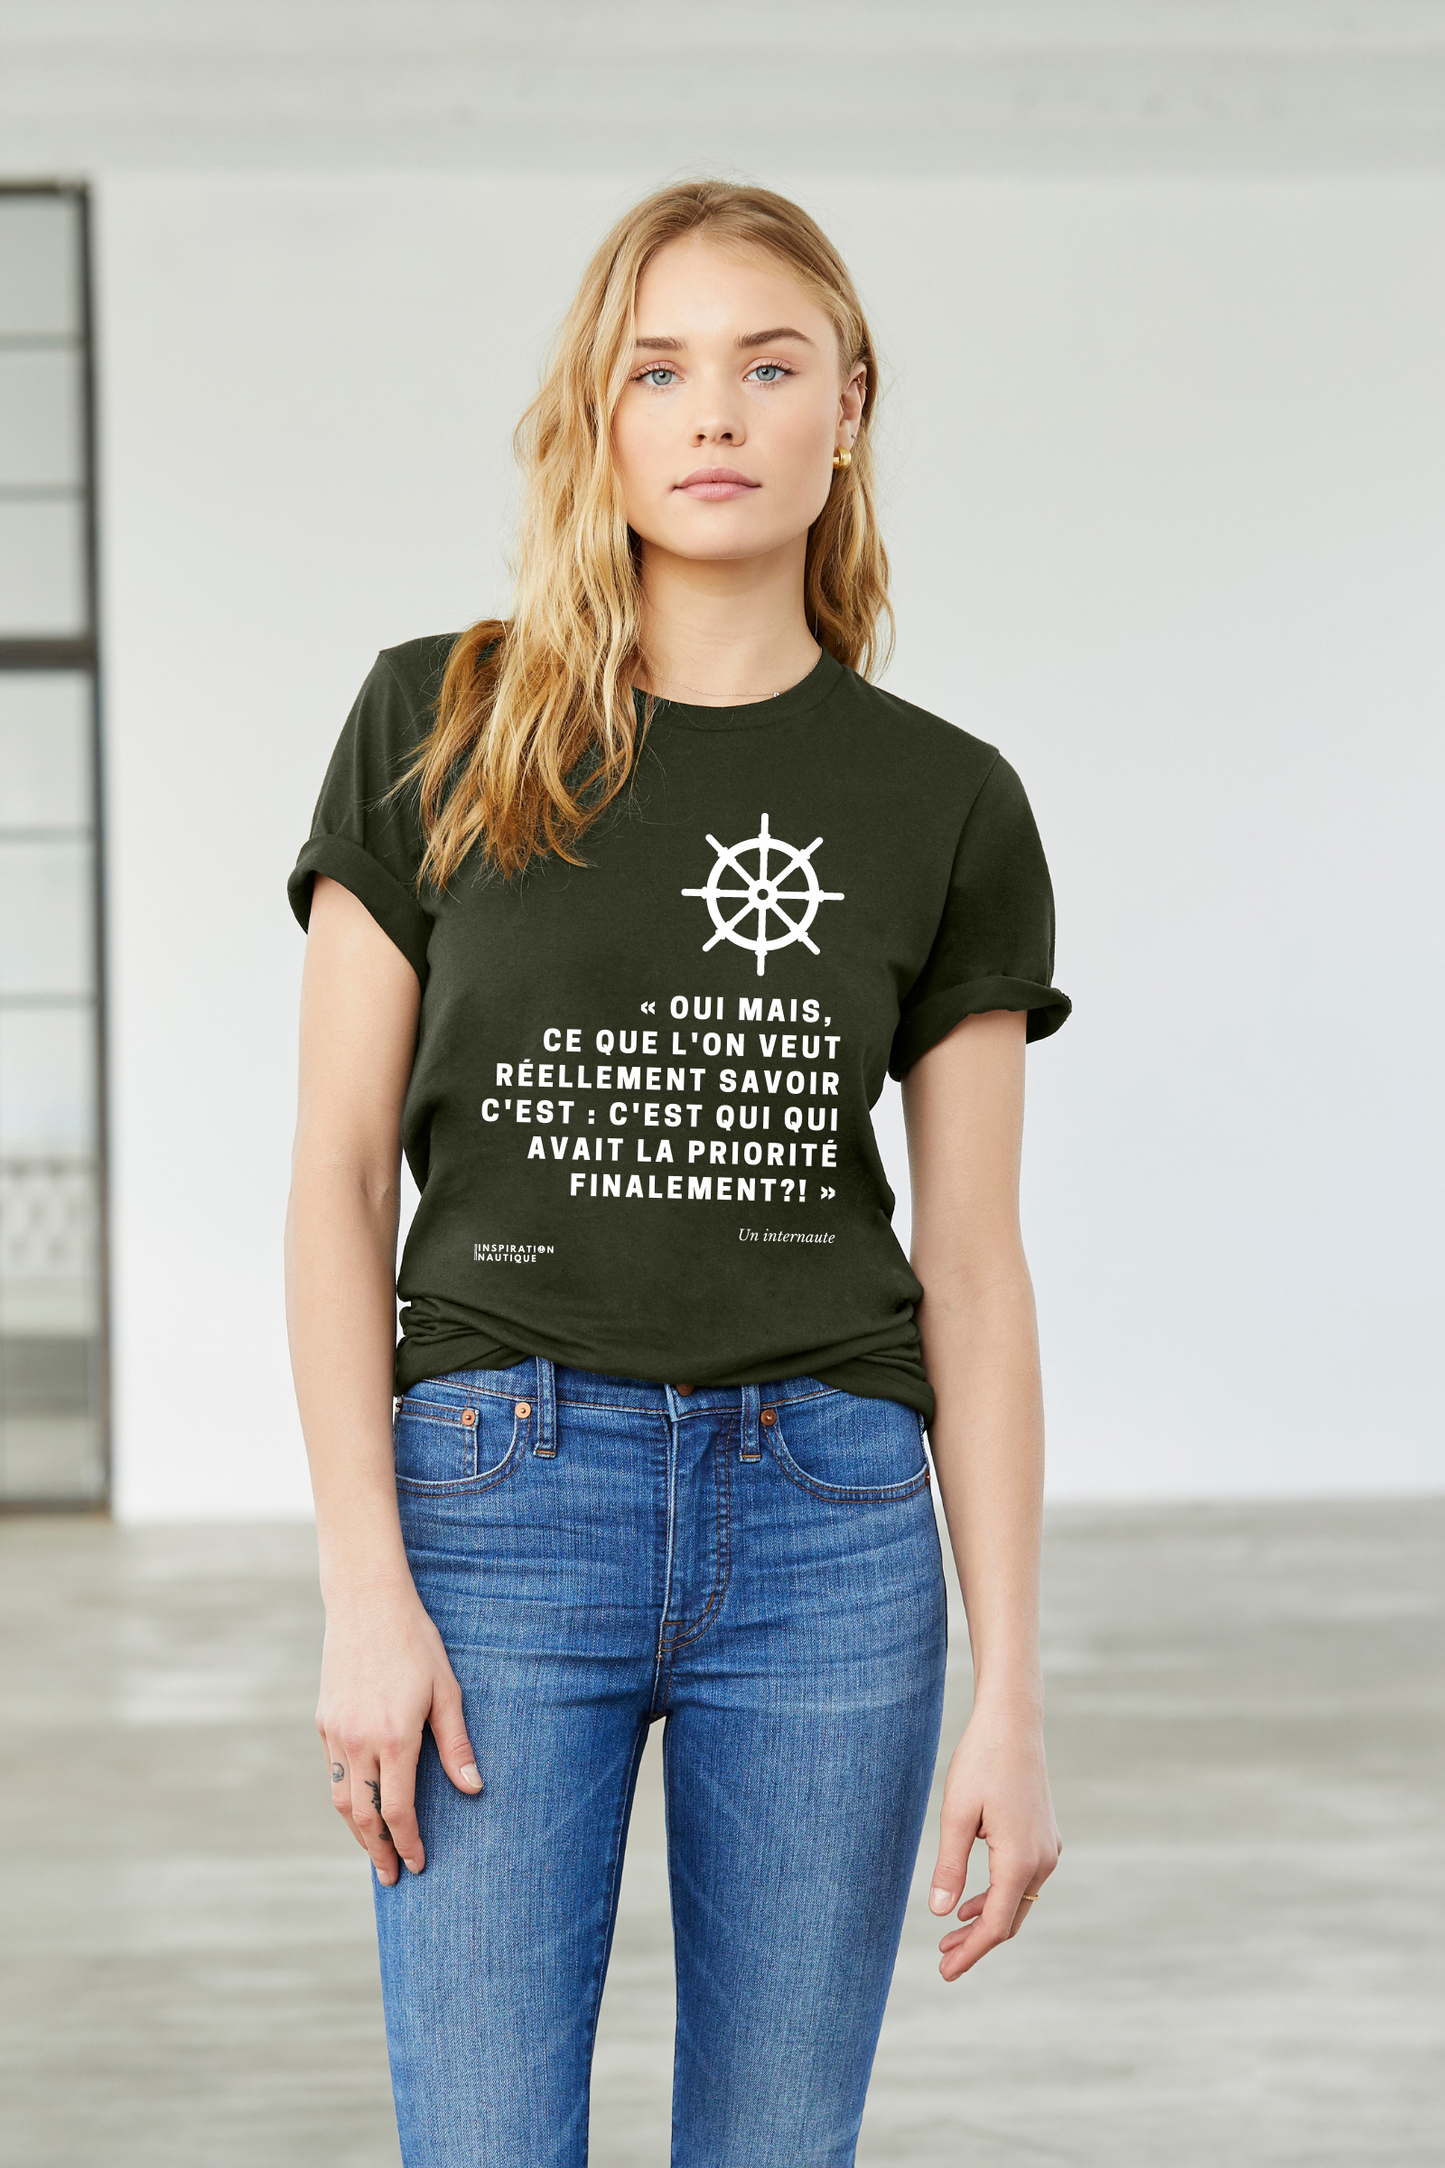 Unisex t-shirt: Who had priority in the end? (wheel) - White visual